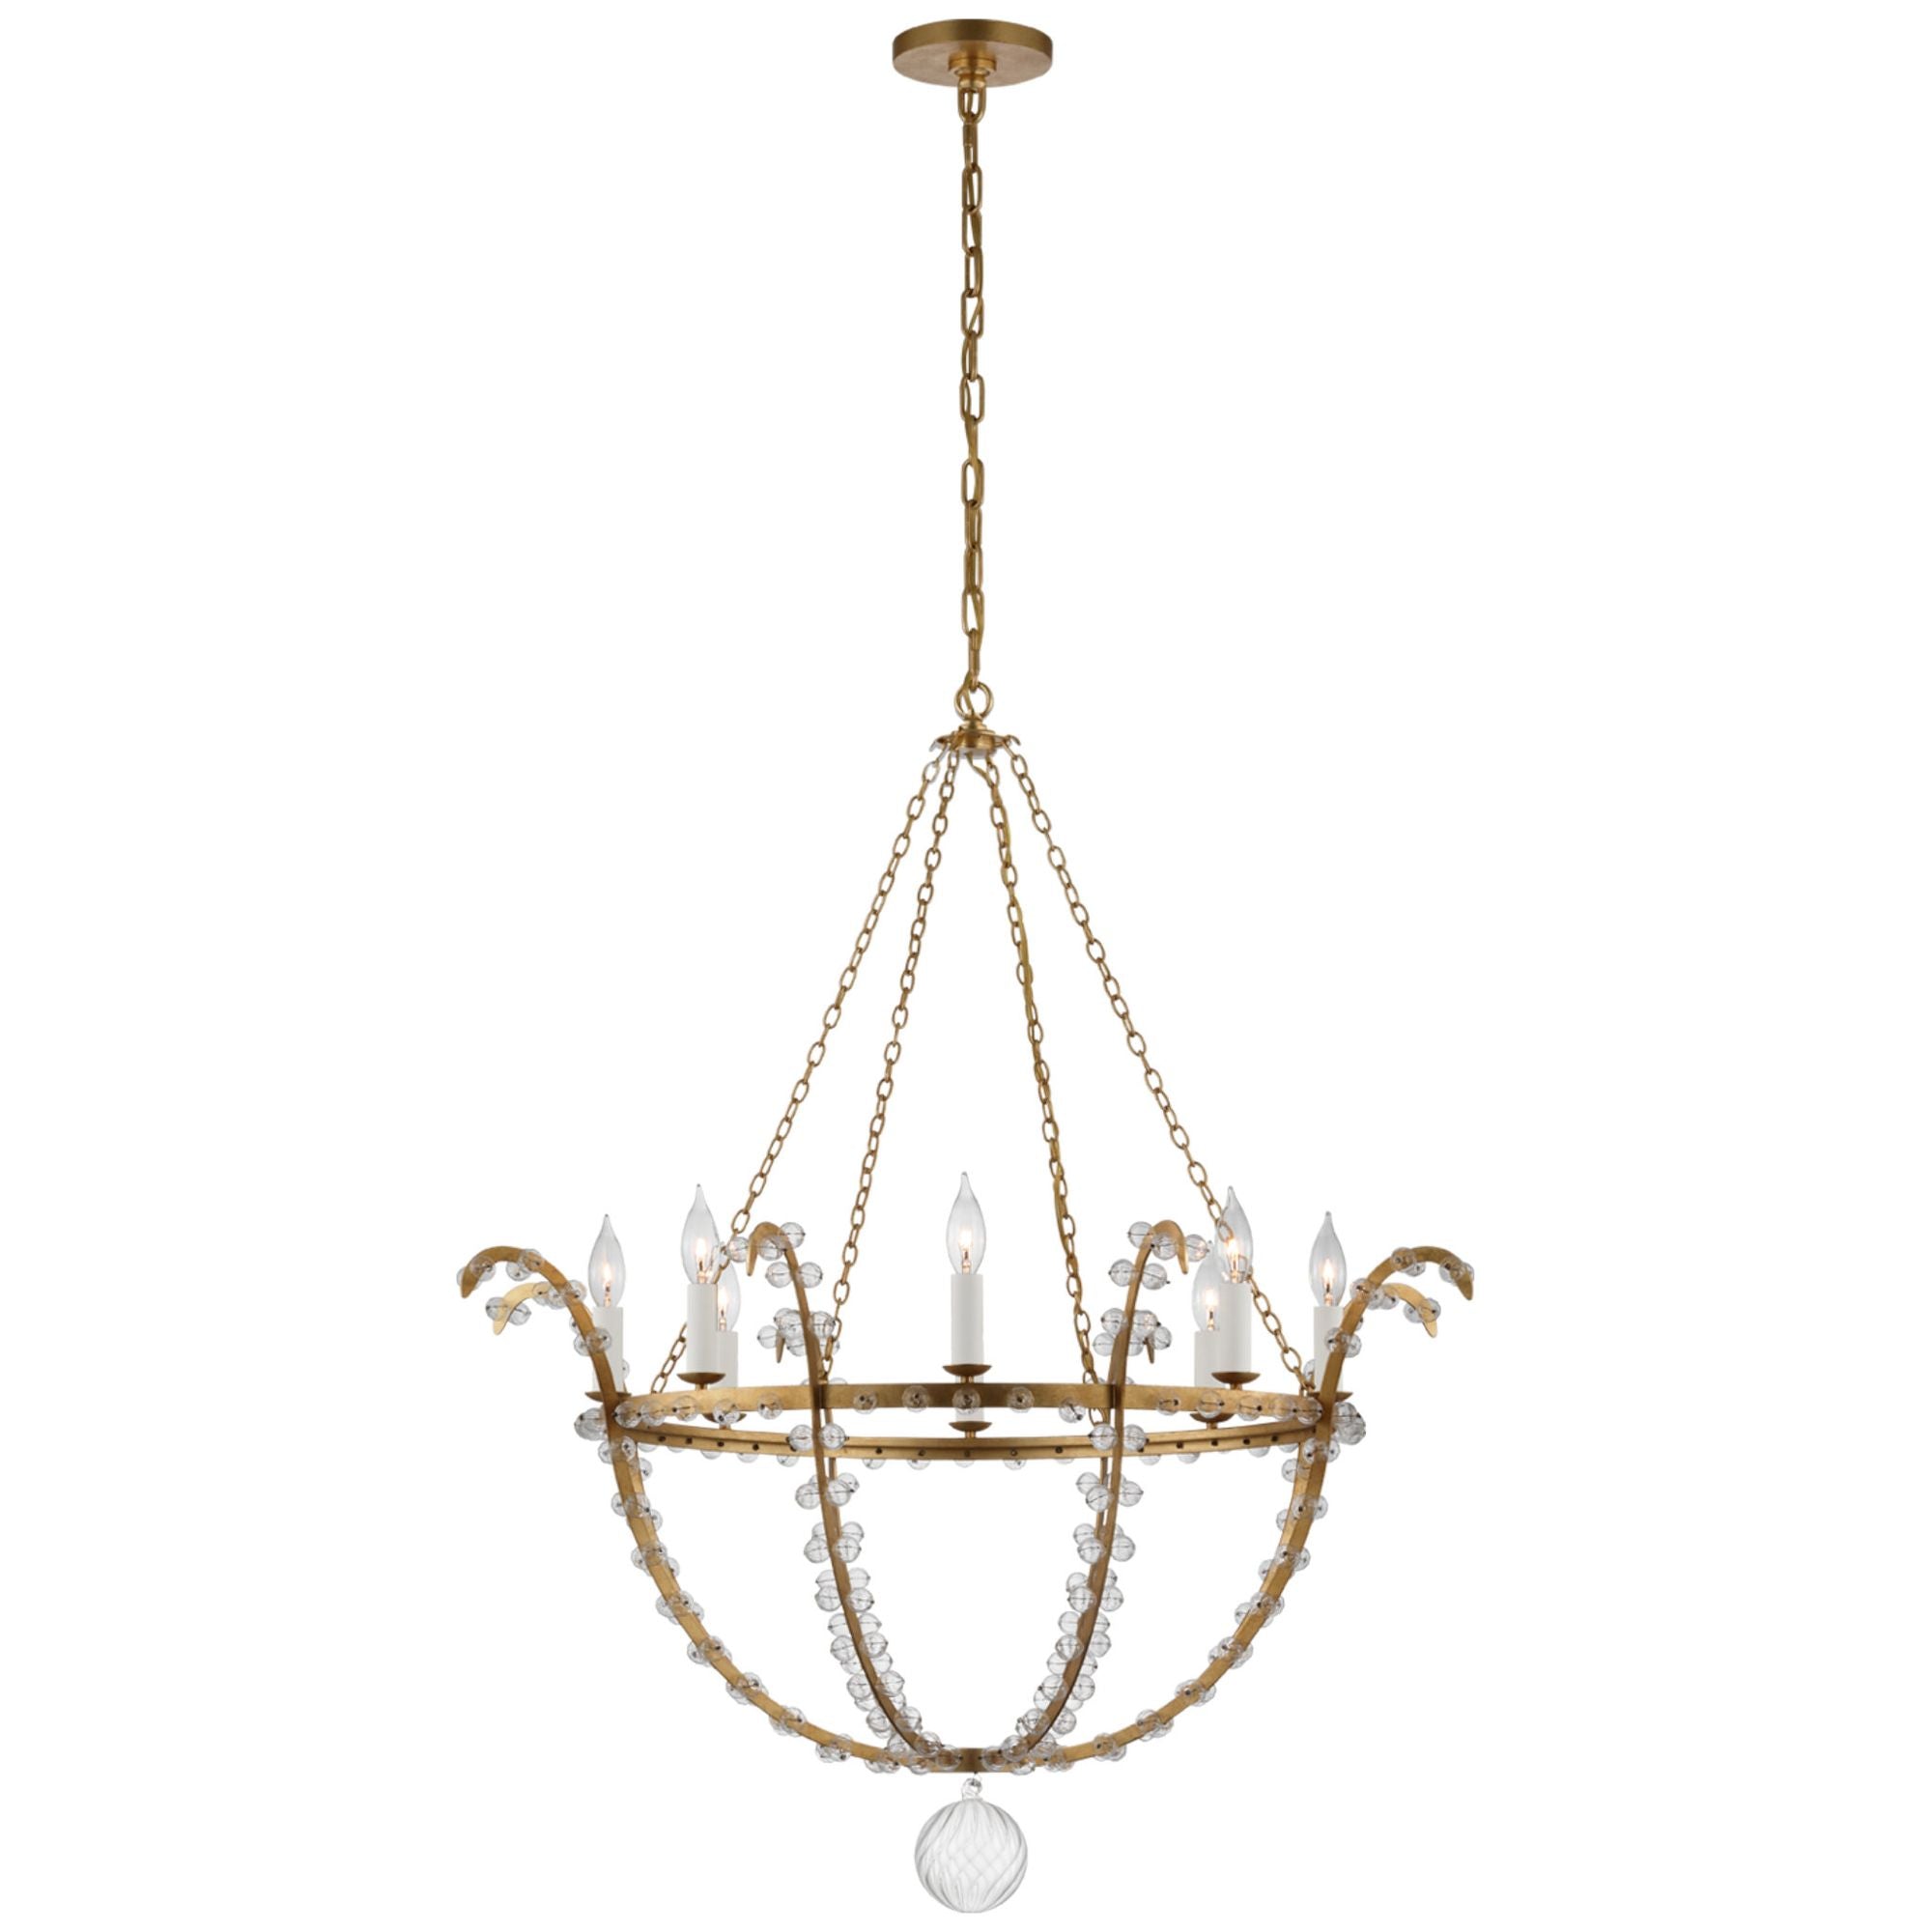 Julie Neill Alonzo Large Chandelier in Gild and Clear Glass